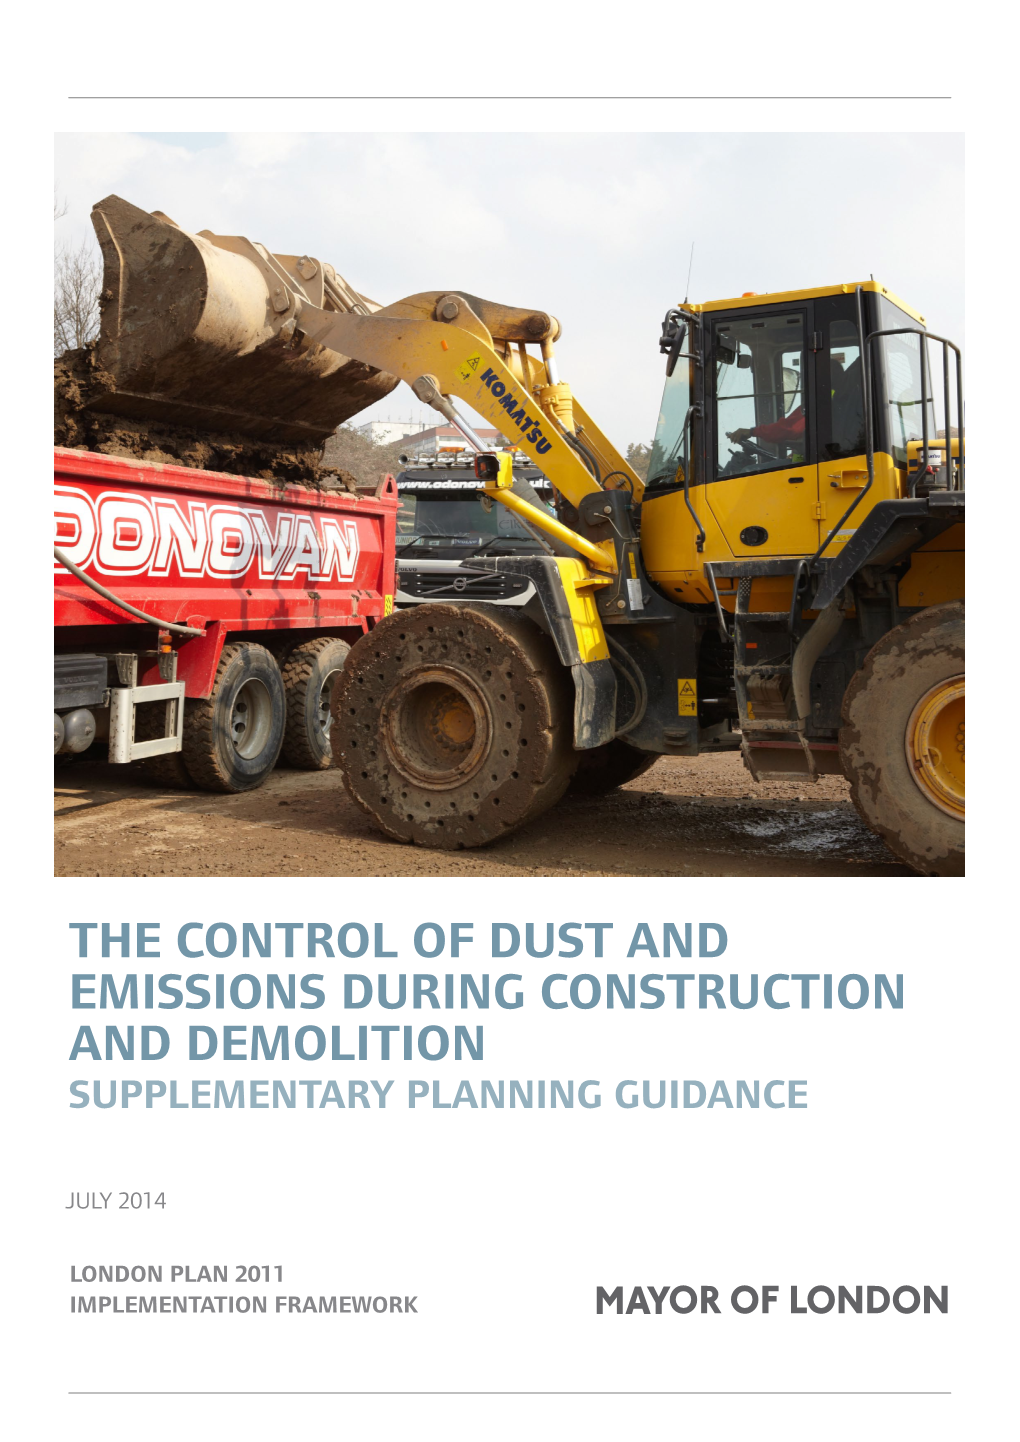 'The Control of Dust and Emissions During Construction and Demolition'